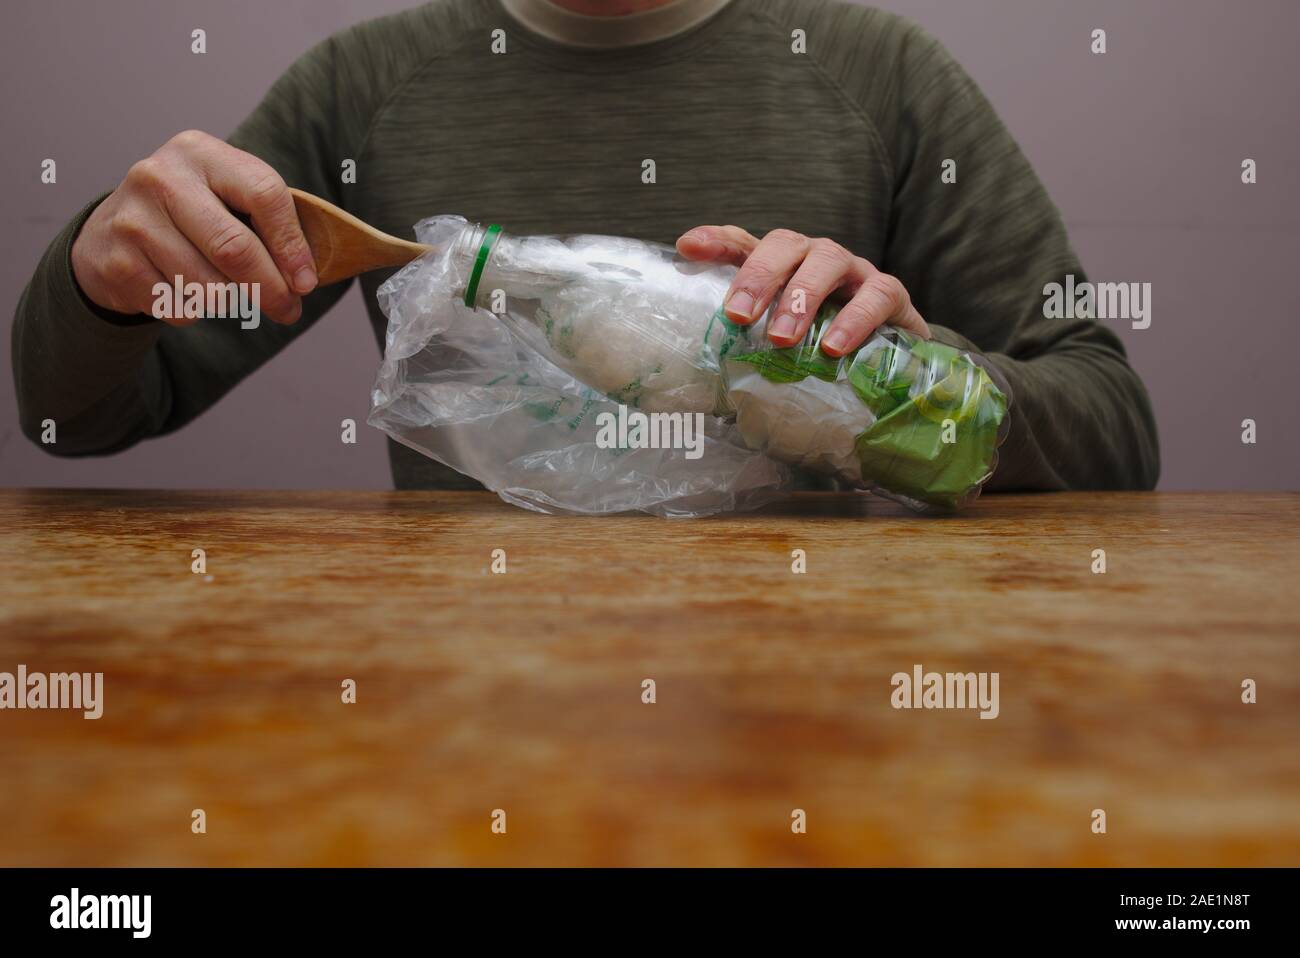 Making an eco brick stuffing plastic packaging waste into a plastic bottle. Stock Photo